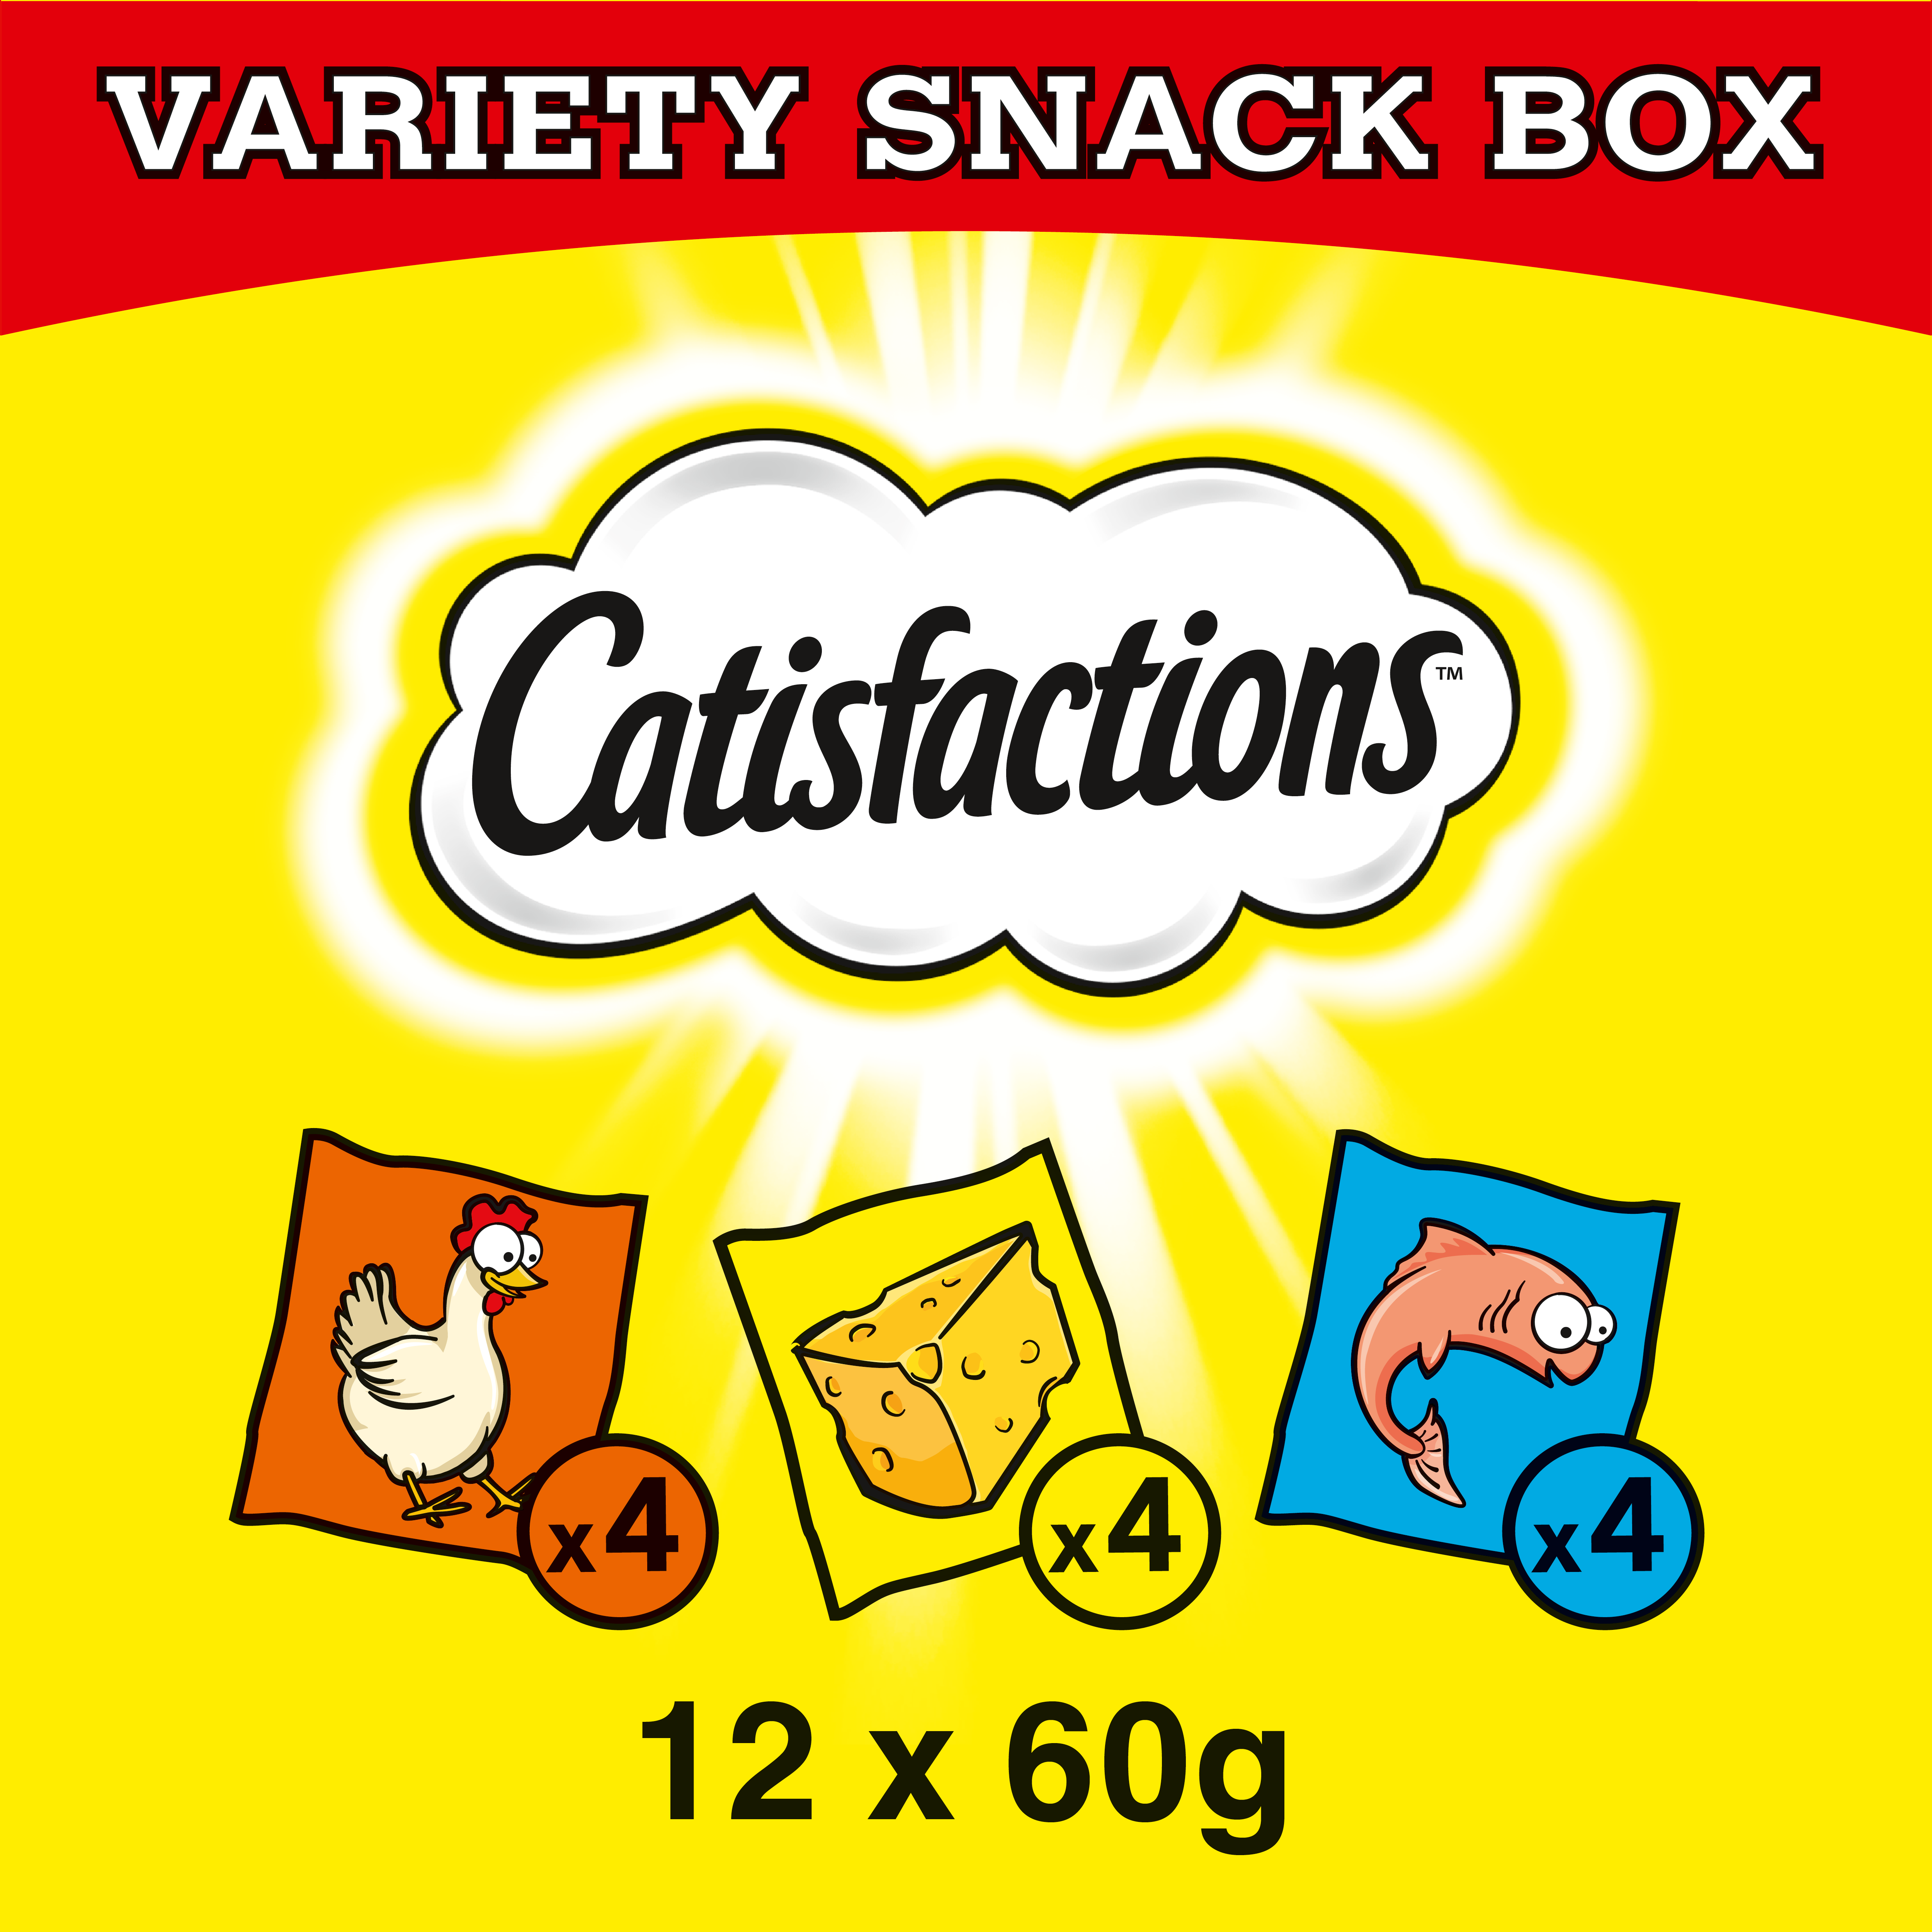 CATISFACTION VARIETY BOX 12X60G